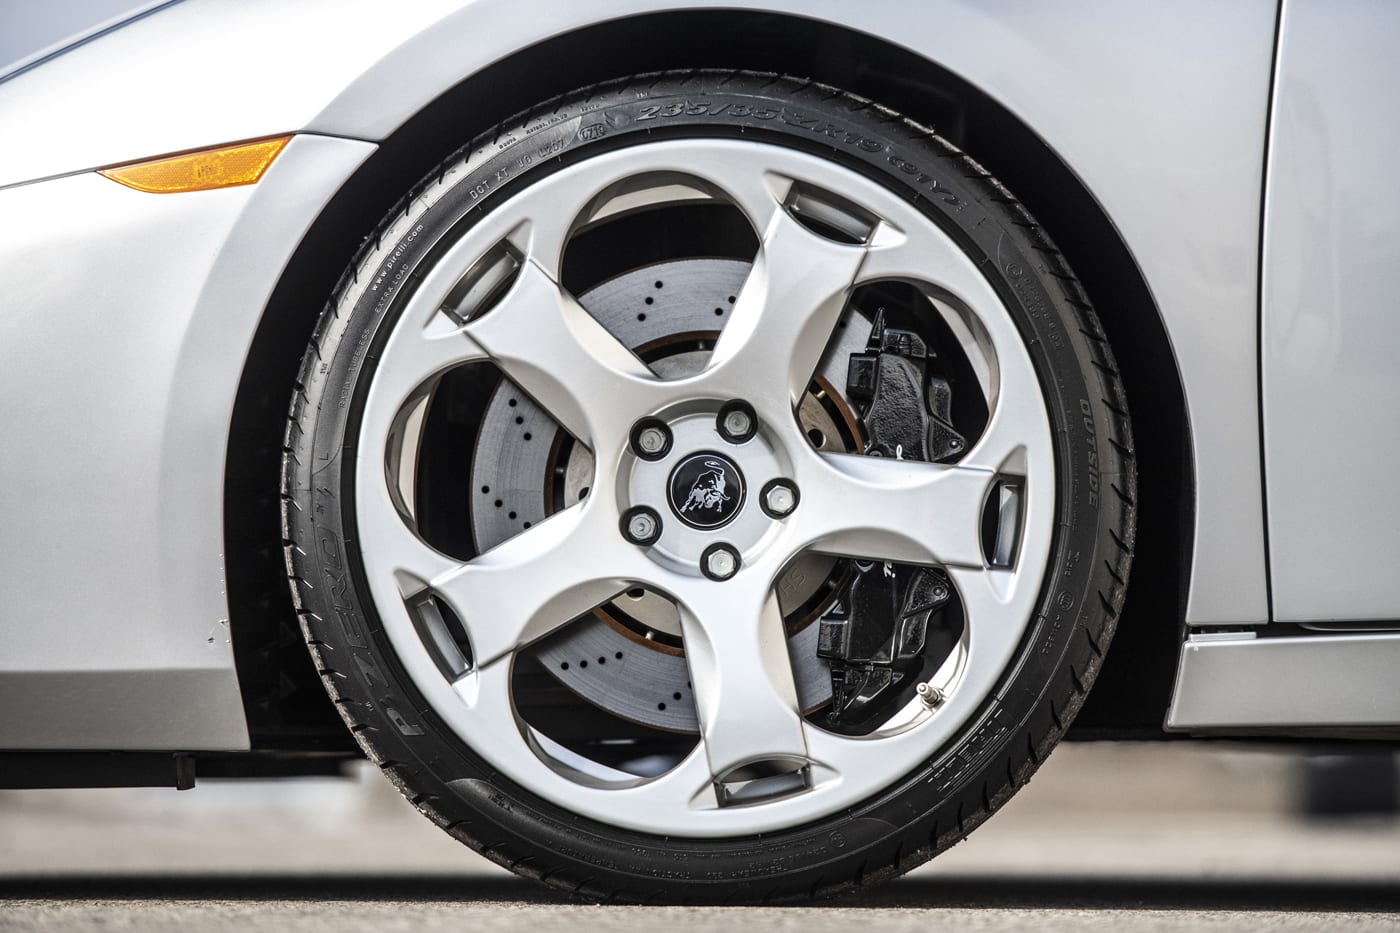 All lamborghini gallardo brakes are easy to modulate and affordable to own.